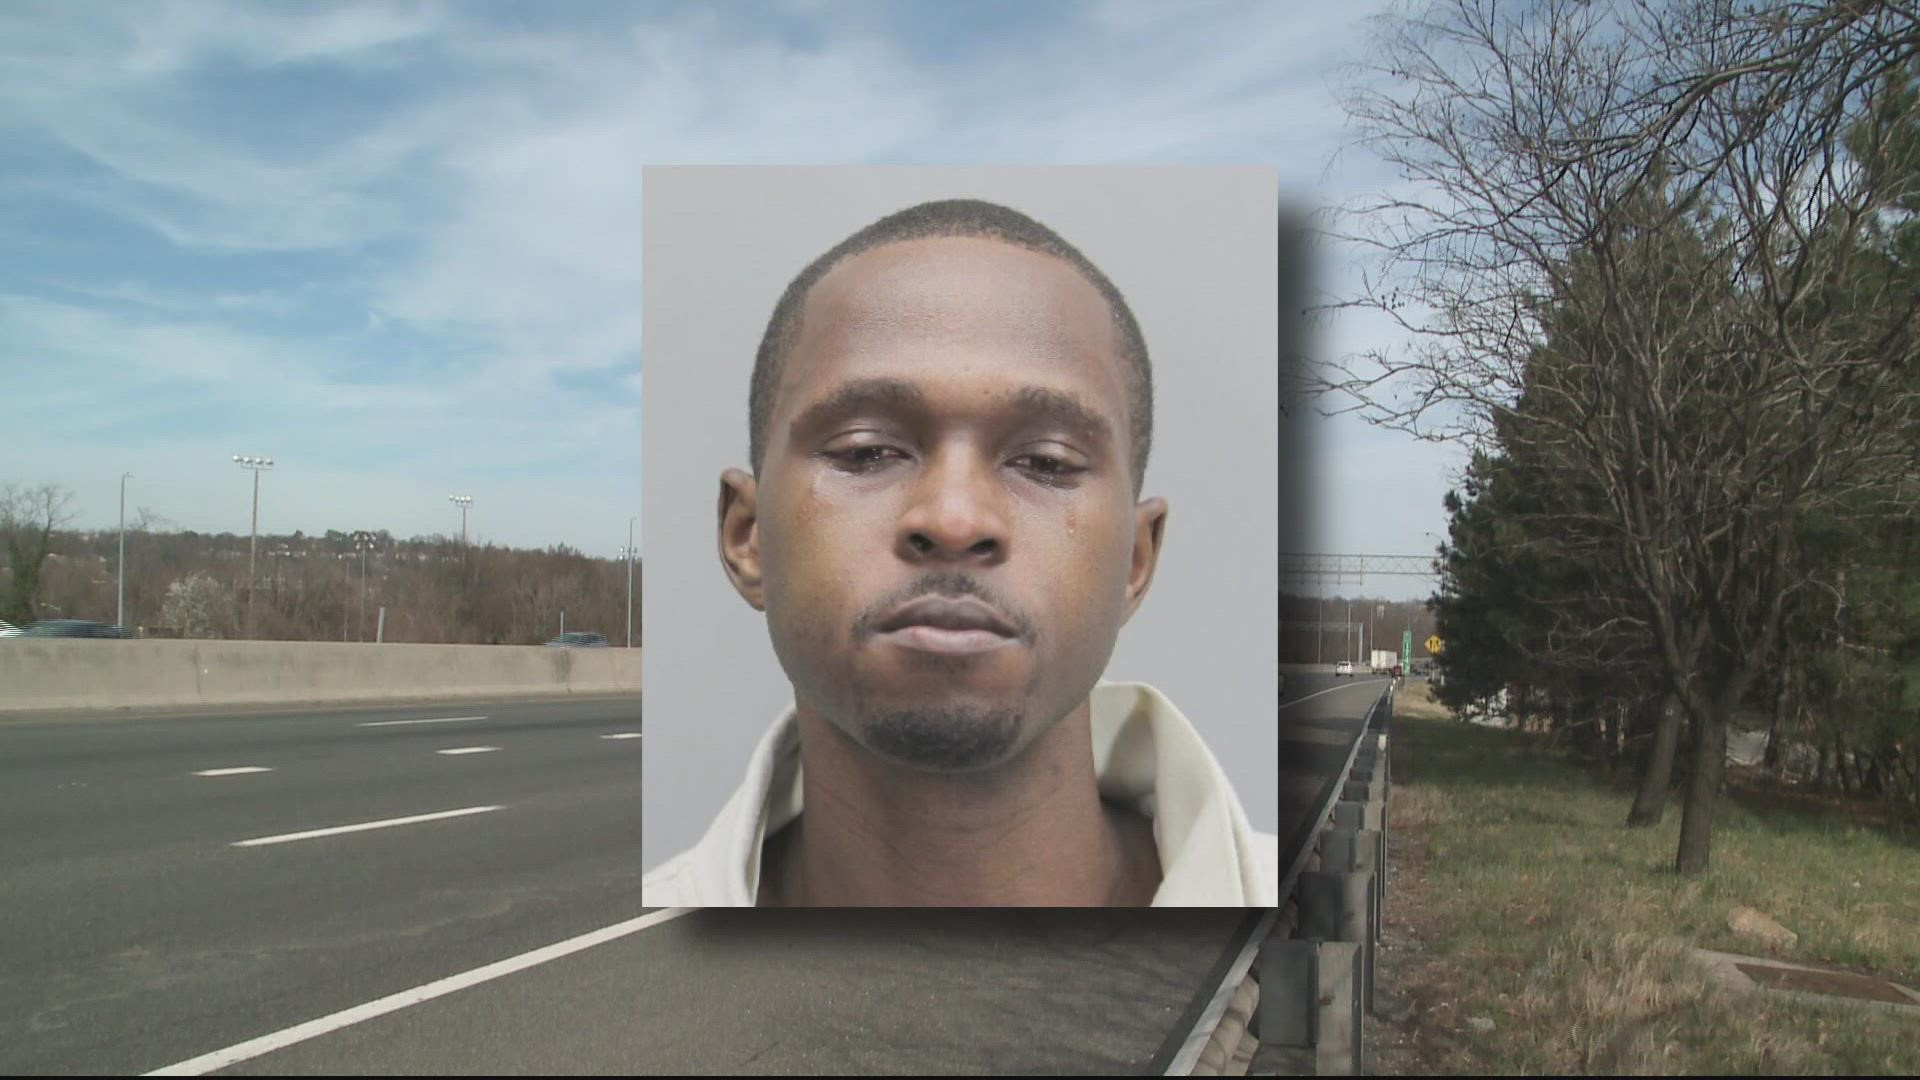 A grand jury has indicted a DC leader for involuntary manslaughter. Devon Lesesne is accused of driving drunk when he hit and killed 20-year-old Katherine Reyes